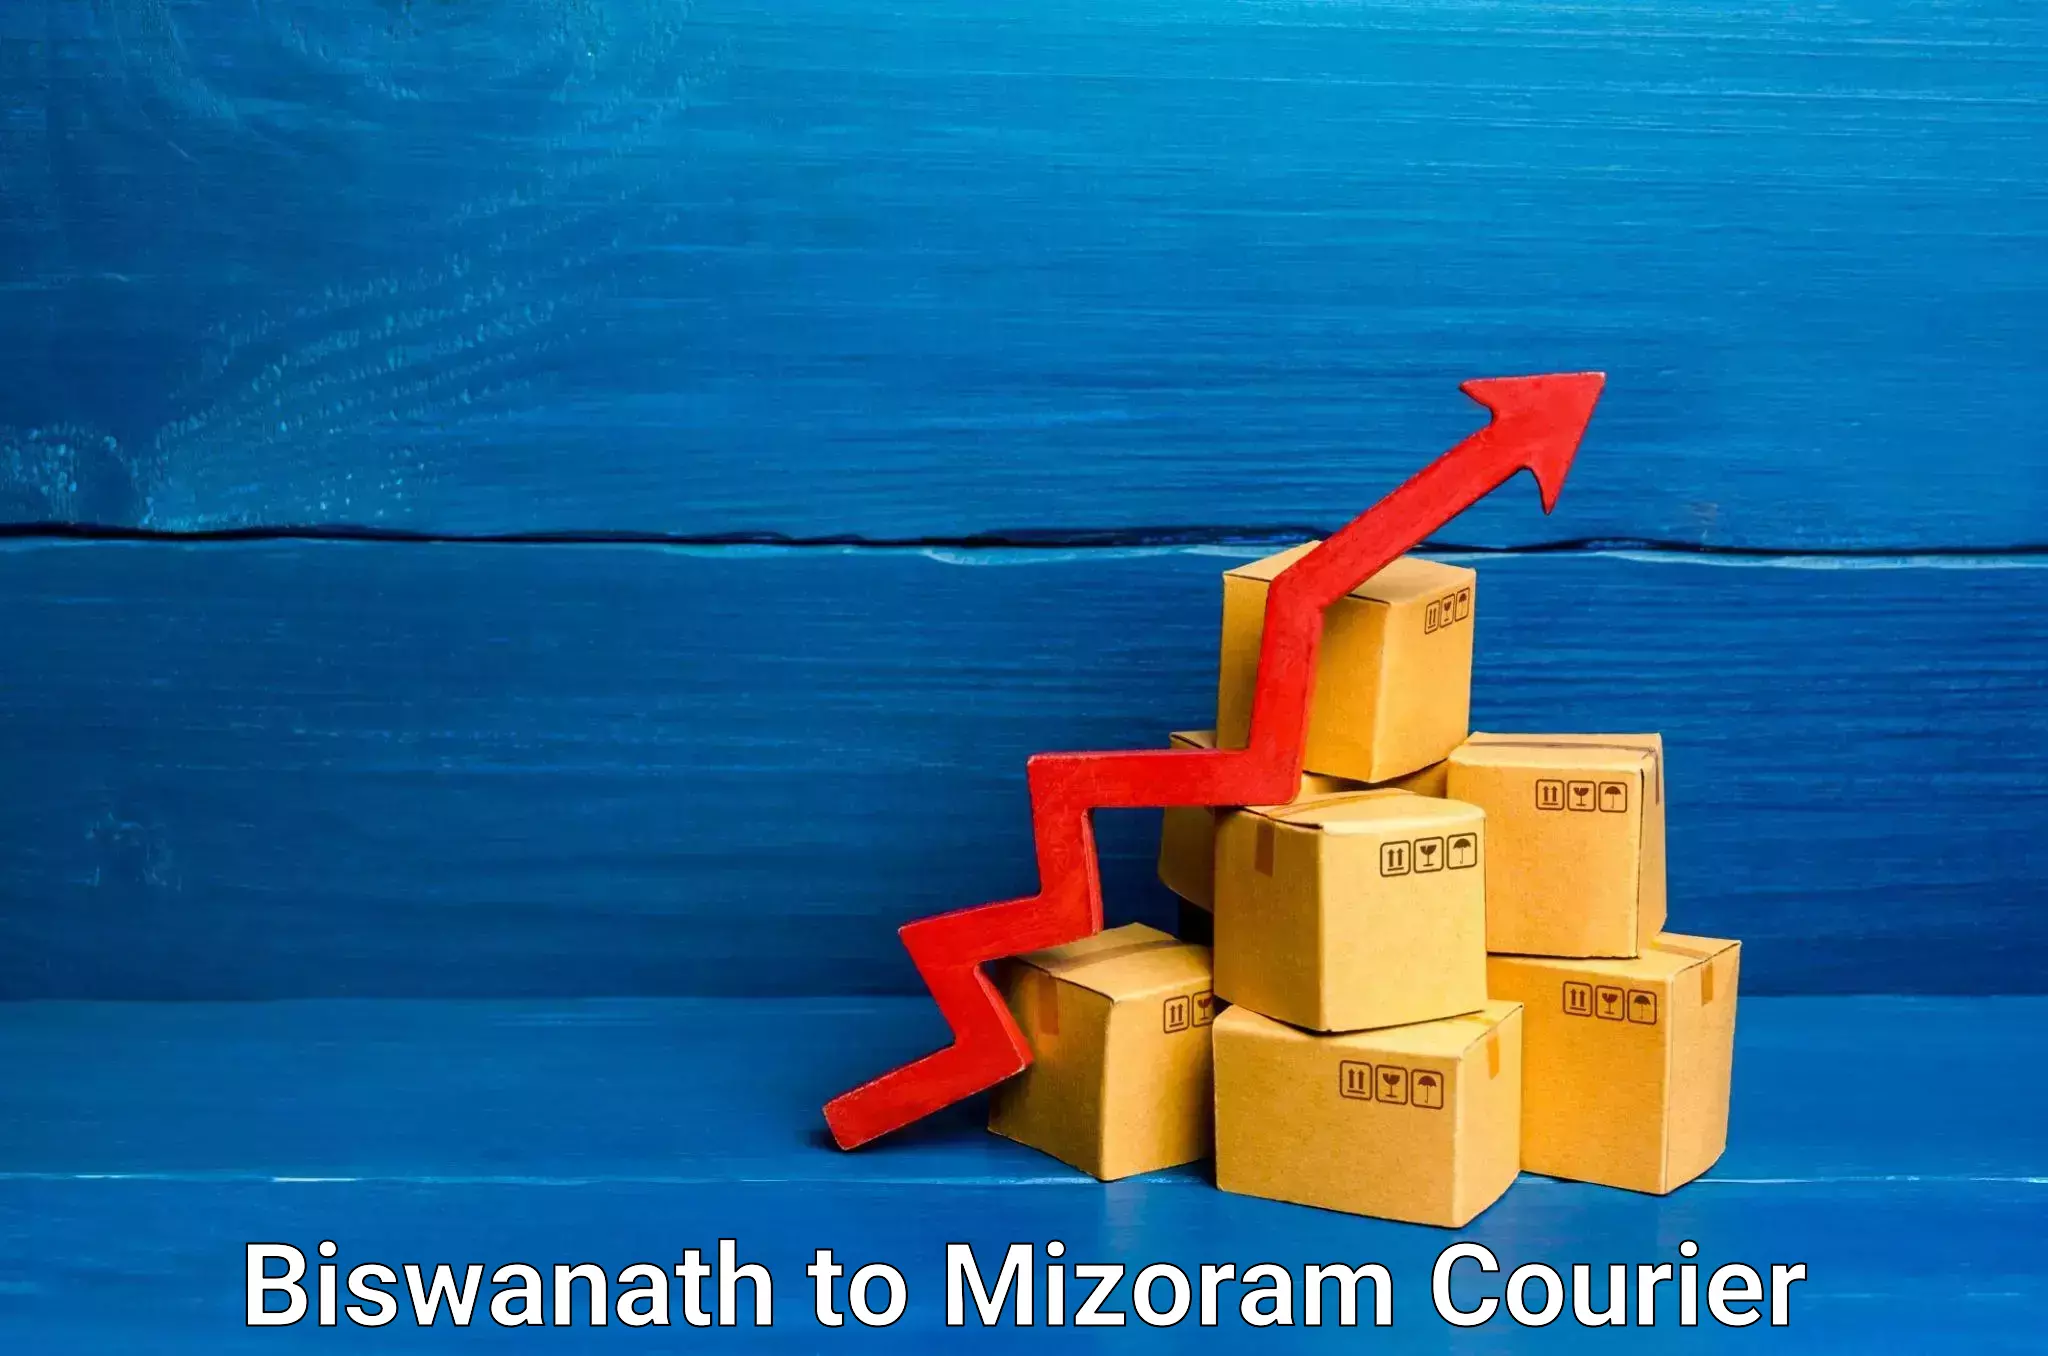 Express delivery capabilities in Biswanath to Saitual